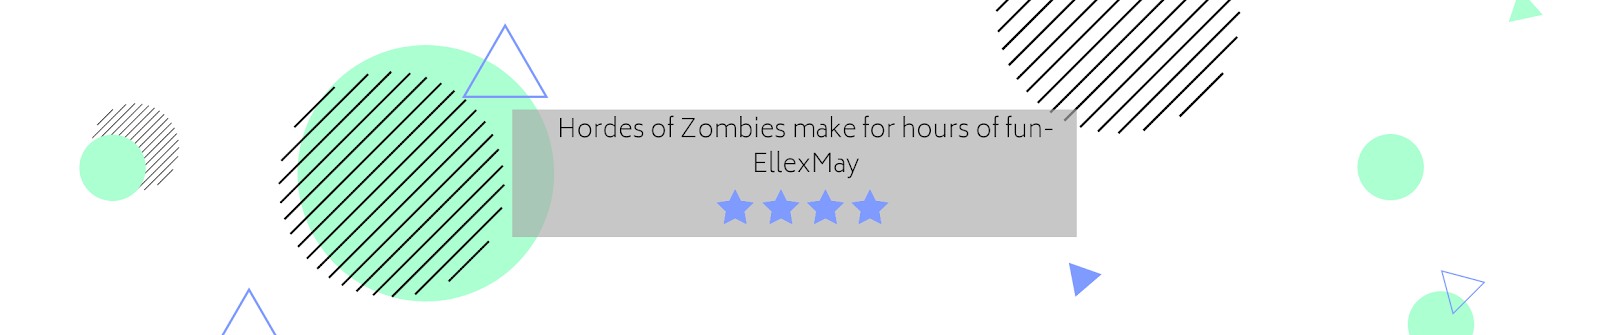 World War Z  PS4 Review - EllexMay